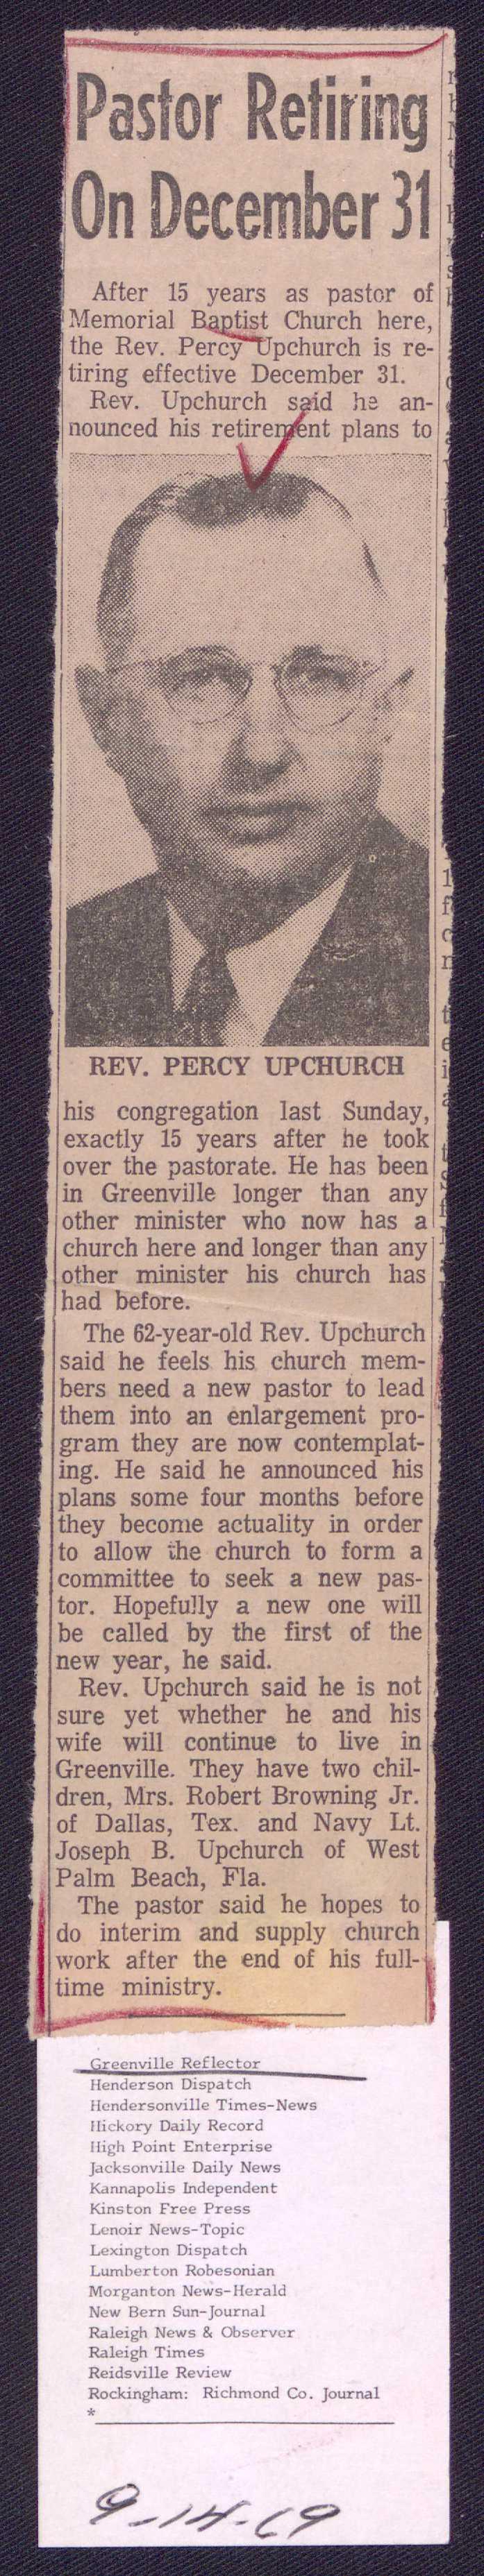 Pastor Retiring r 1Qn December 31 After 15 years as pastor of Memorial Baptist Church here, the Rev. PerCY'tJpchurch is retiring effective December 31. Rev. Upchurch s id he announced his retire nt plans to J REV.